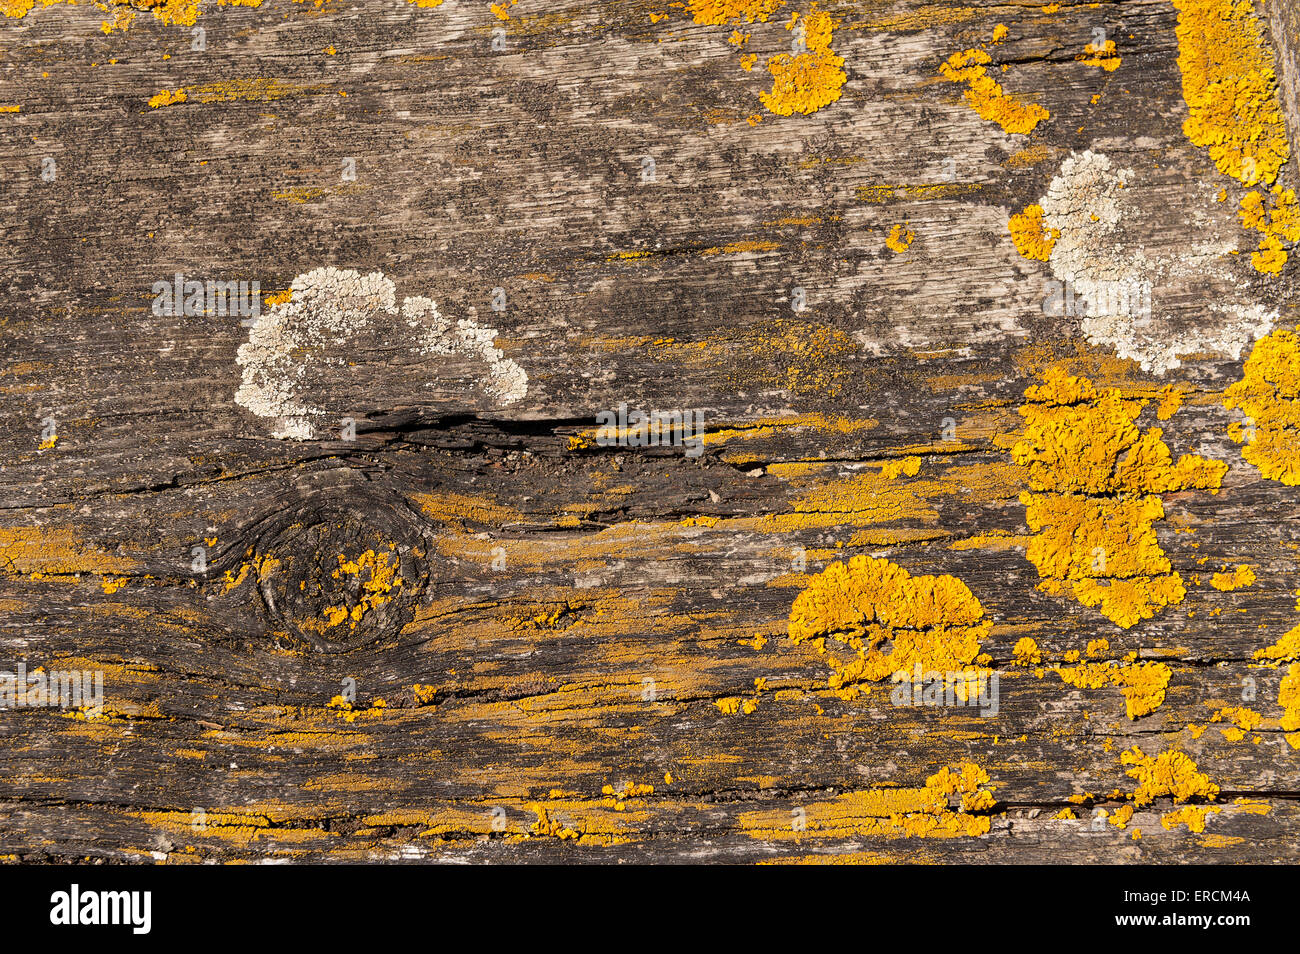 Bright yellow patches of common orange lichen maritime sunburst spreading out on old oak wooden causeway grey and white crustose Stock Photo